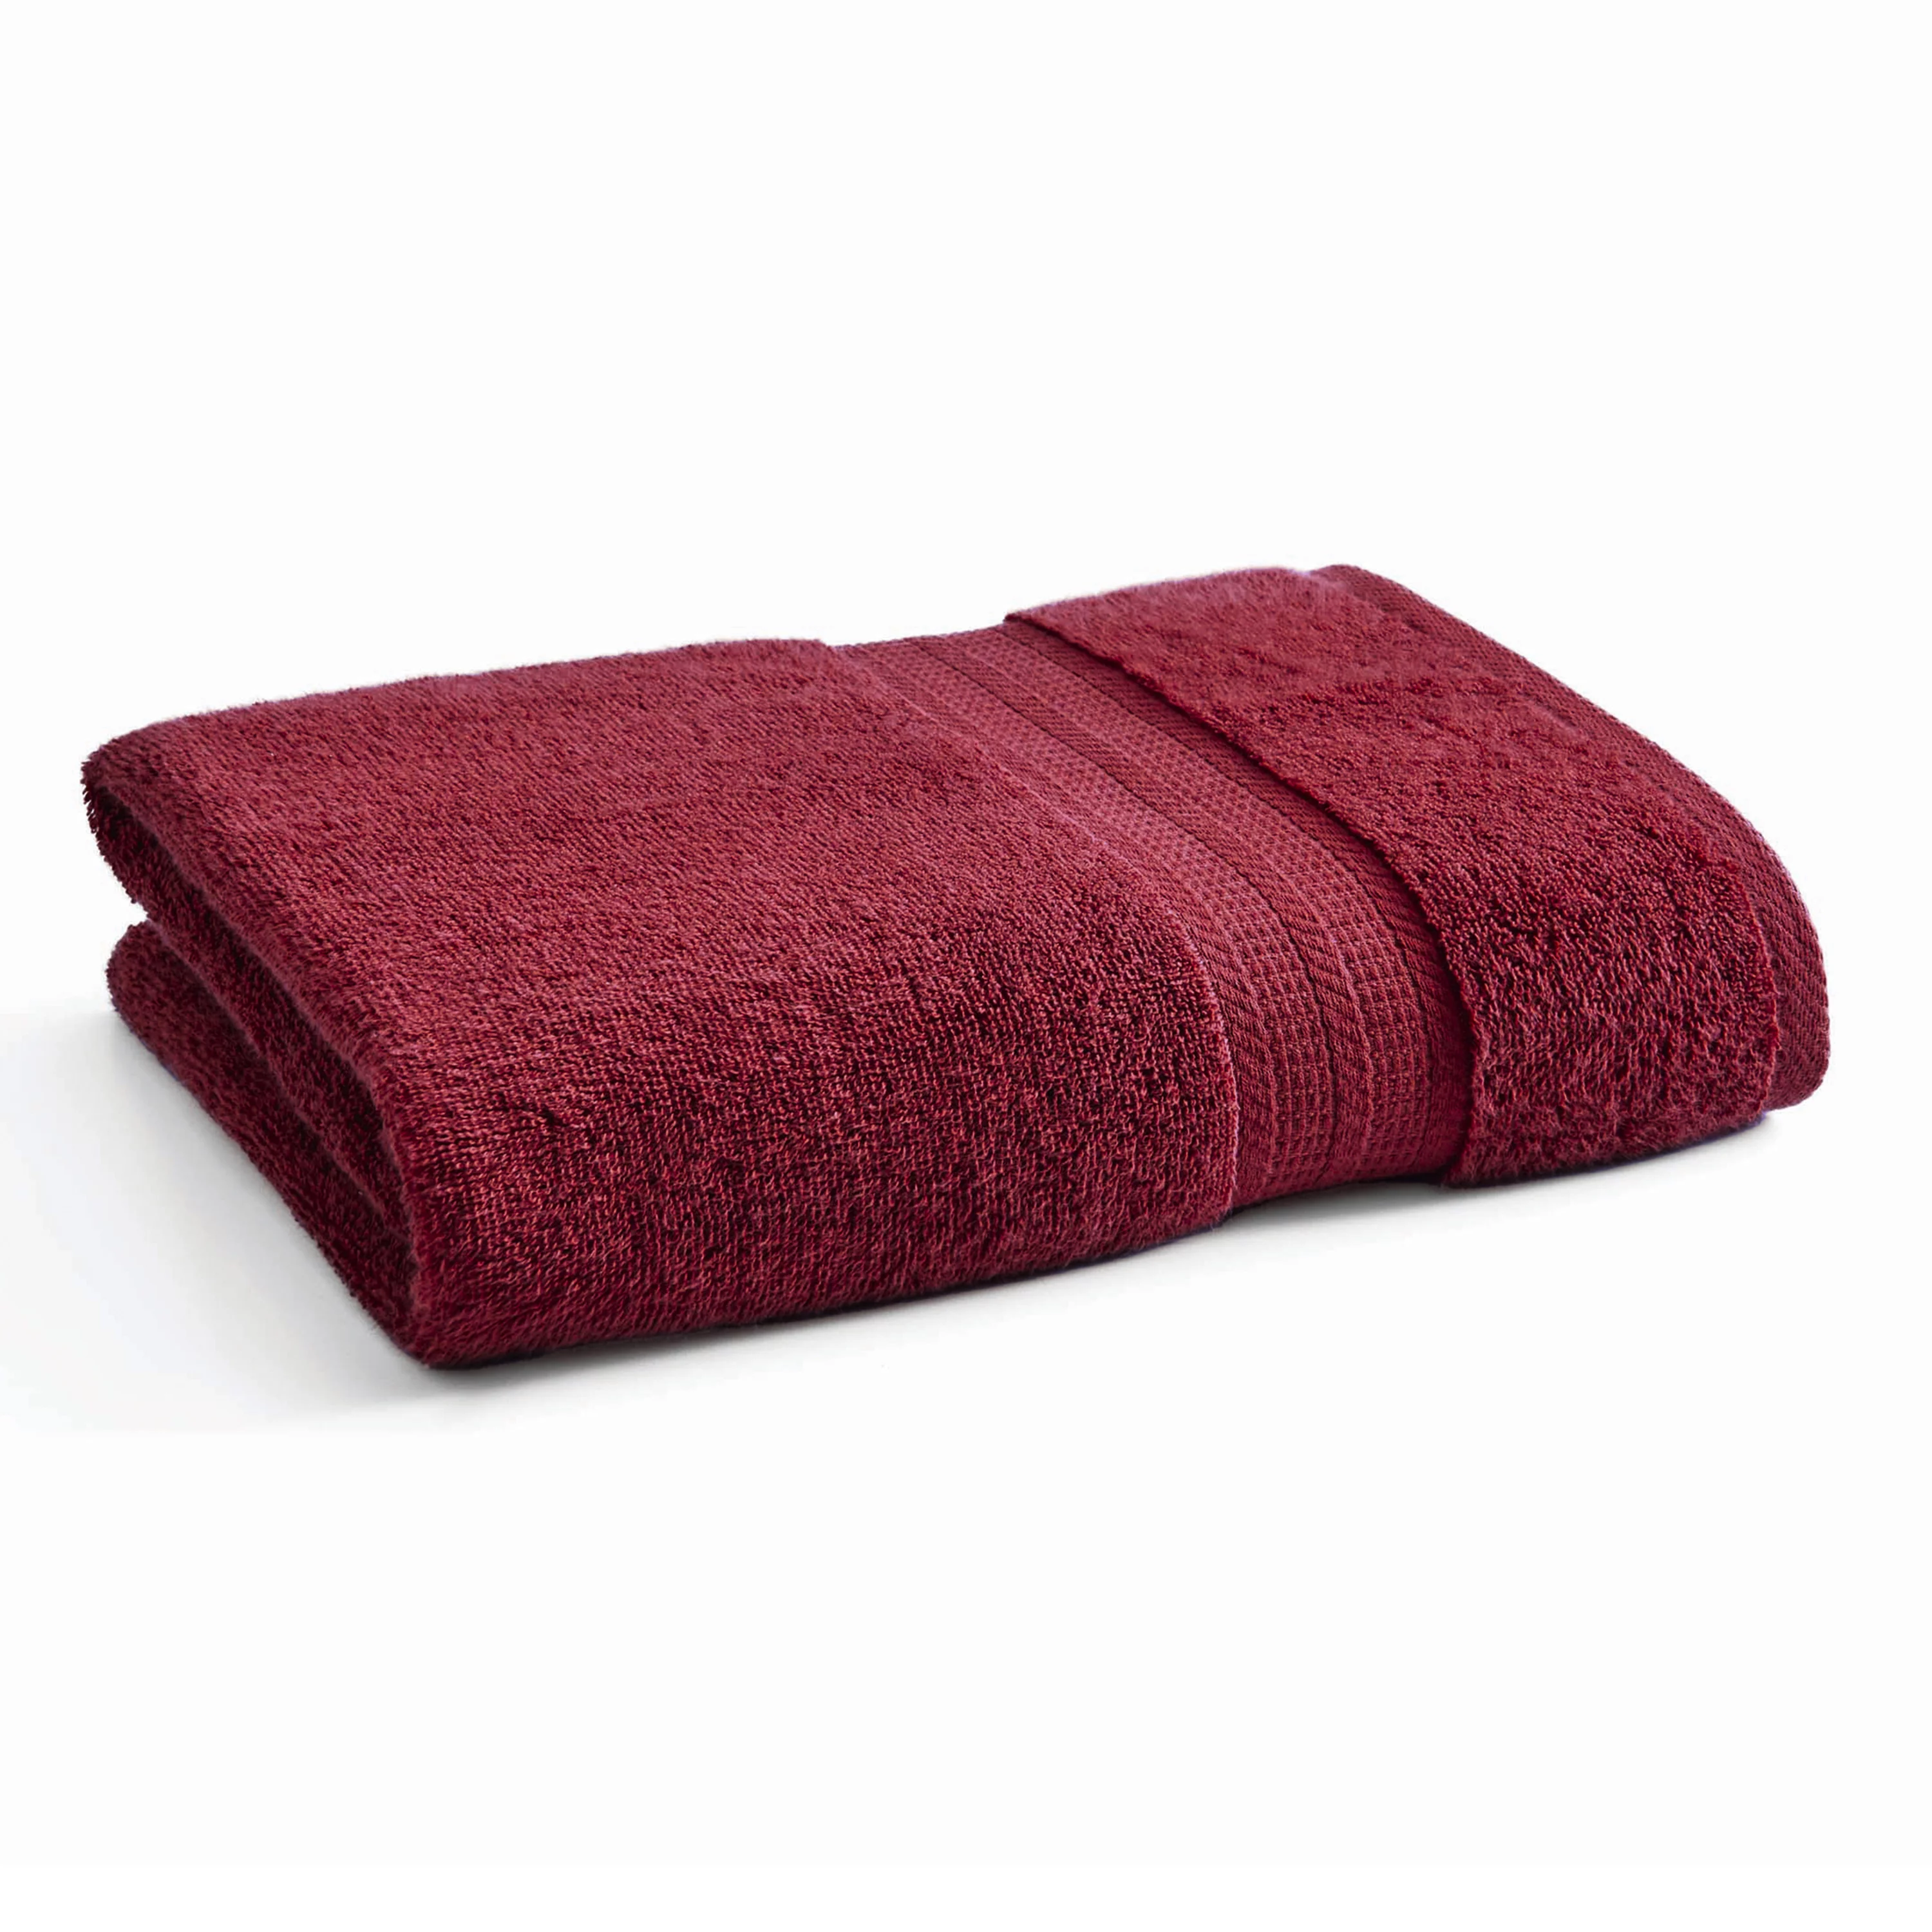 Better Homes & Gardens Bath Sheet, Solid Red